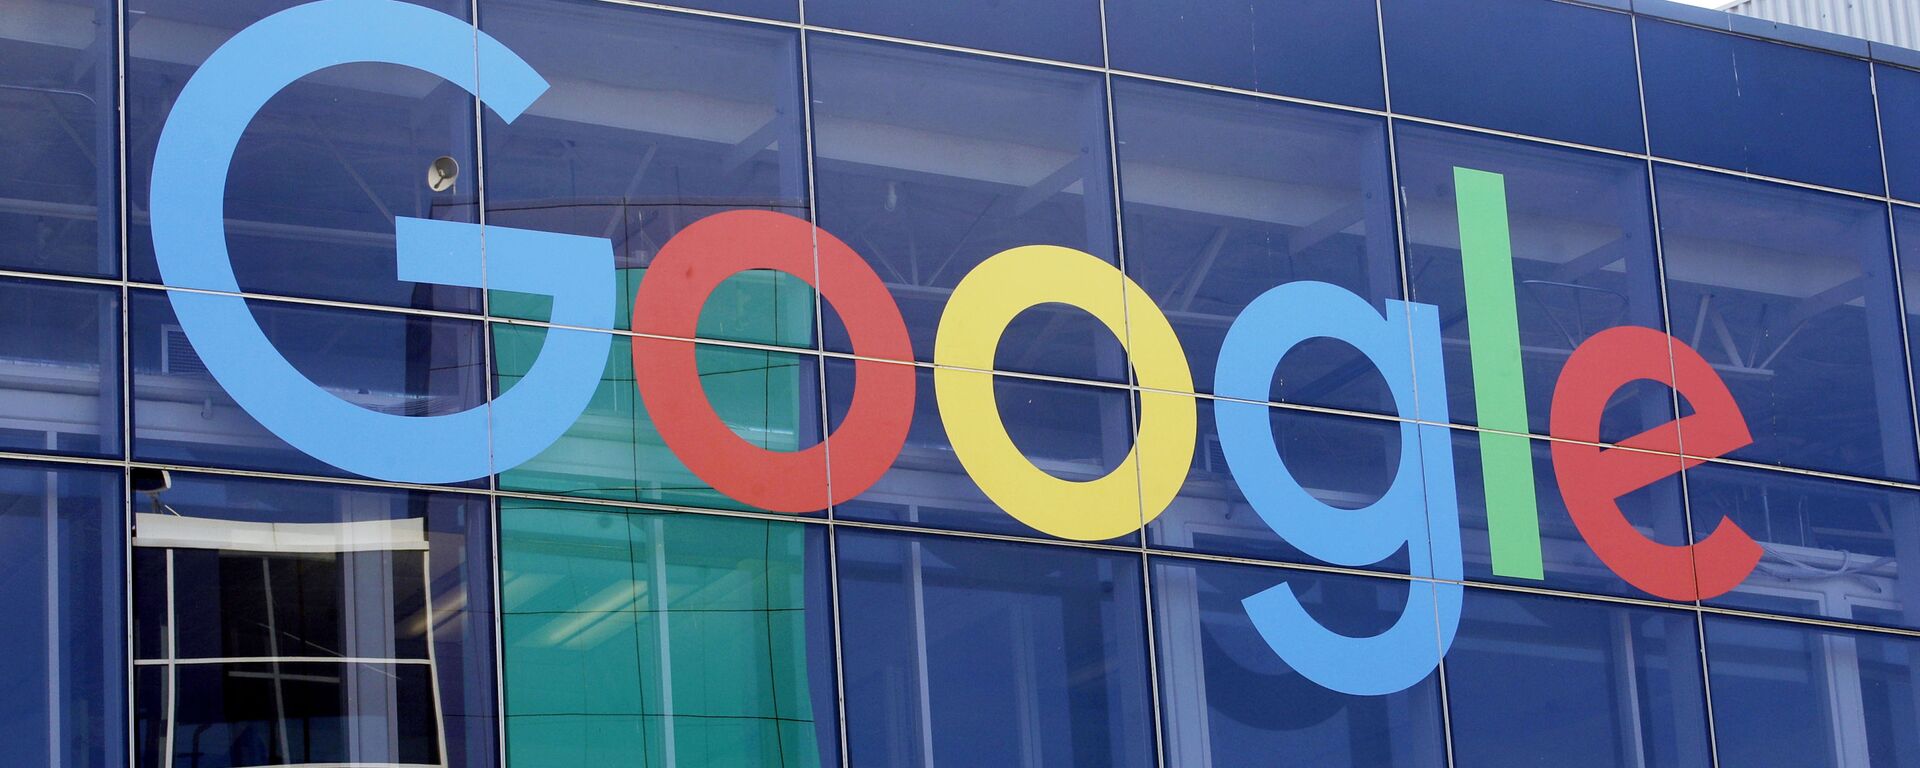 In this Sept. 24, 2019, file photo a sign is shown on a Google building at their campus in Mountain View, Calif. Google is formally pushing back on antitrust claims brought against it by the Justice Department two months ago. - Sputnik International, 1920, 14.03.2021